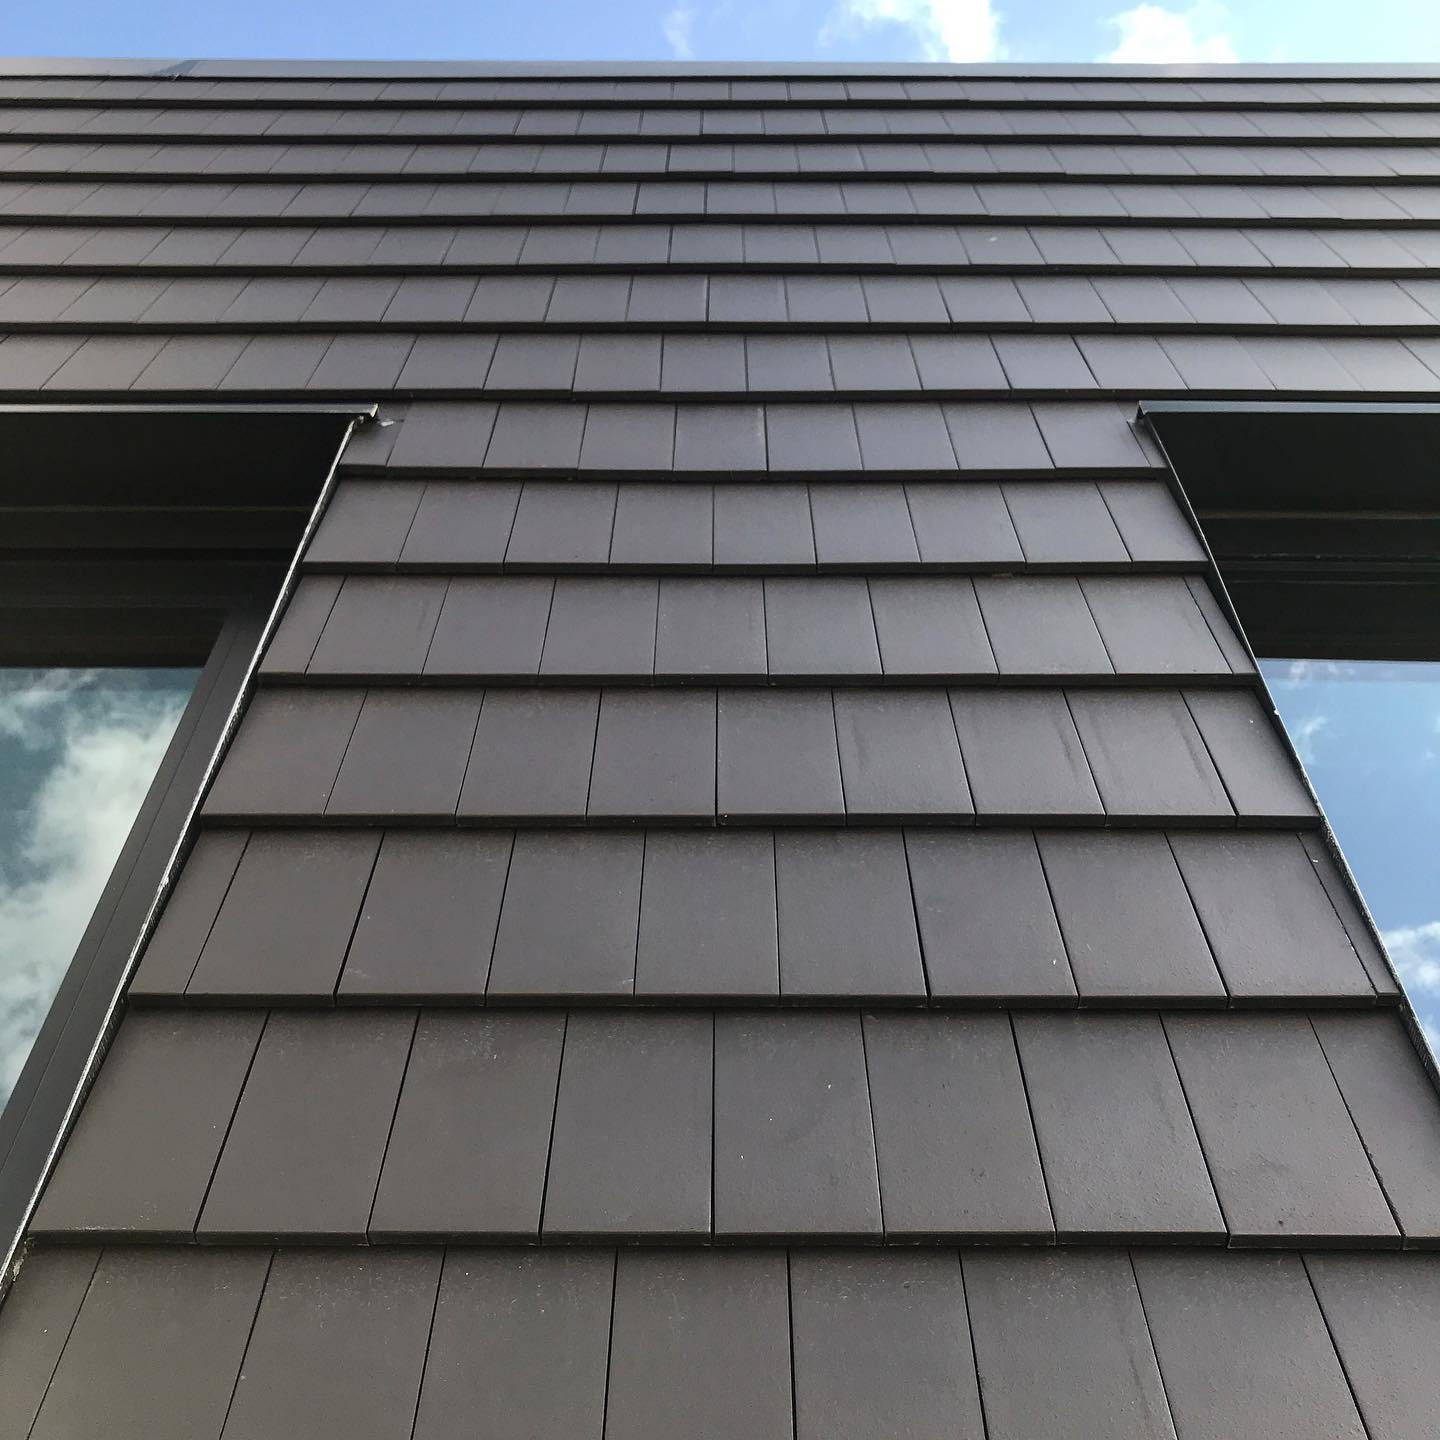 View from a lower level of a part of a house with rectangular black rainscreens installed vertically